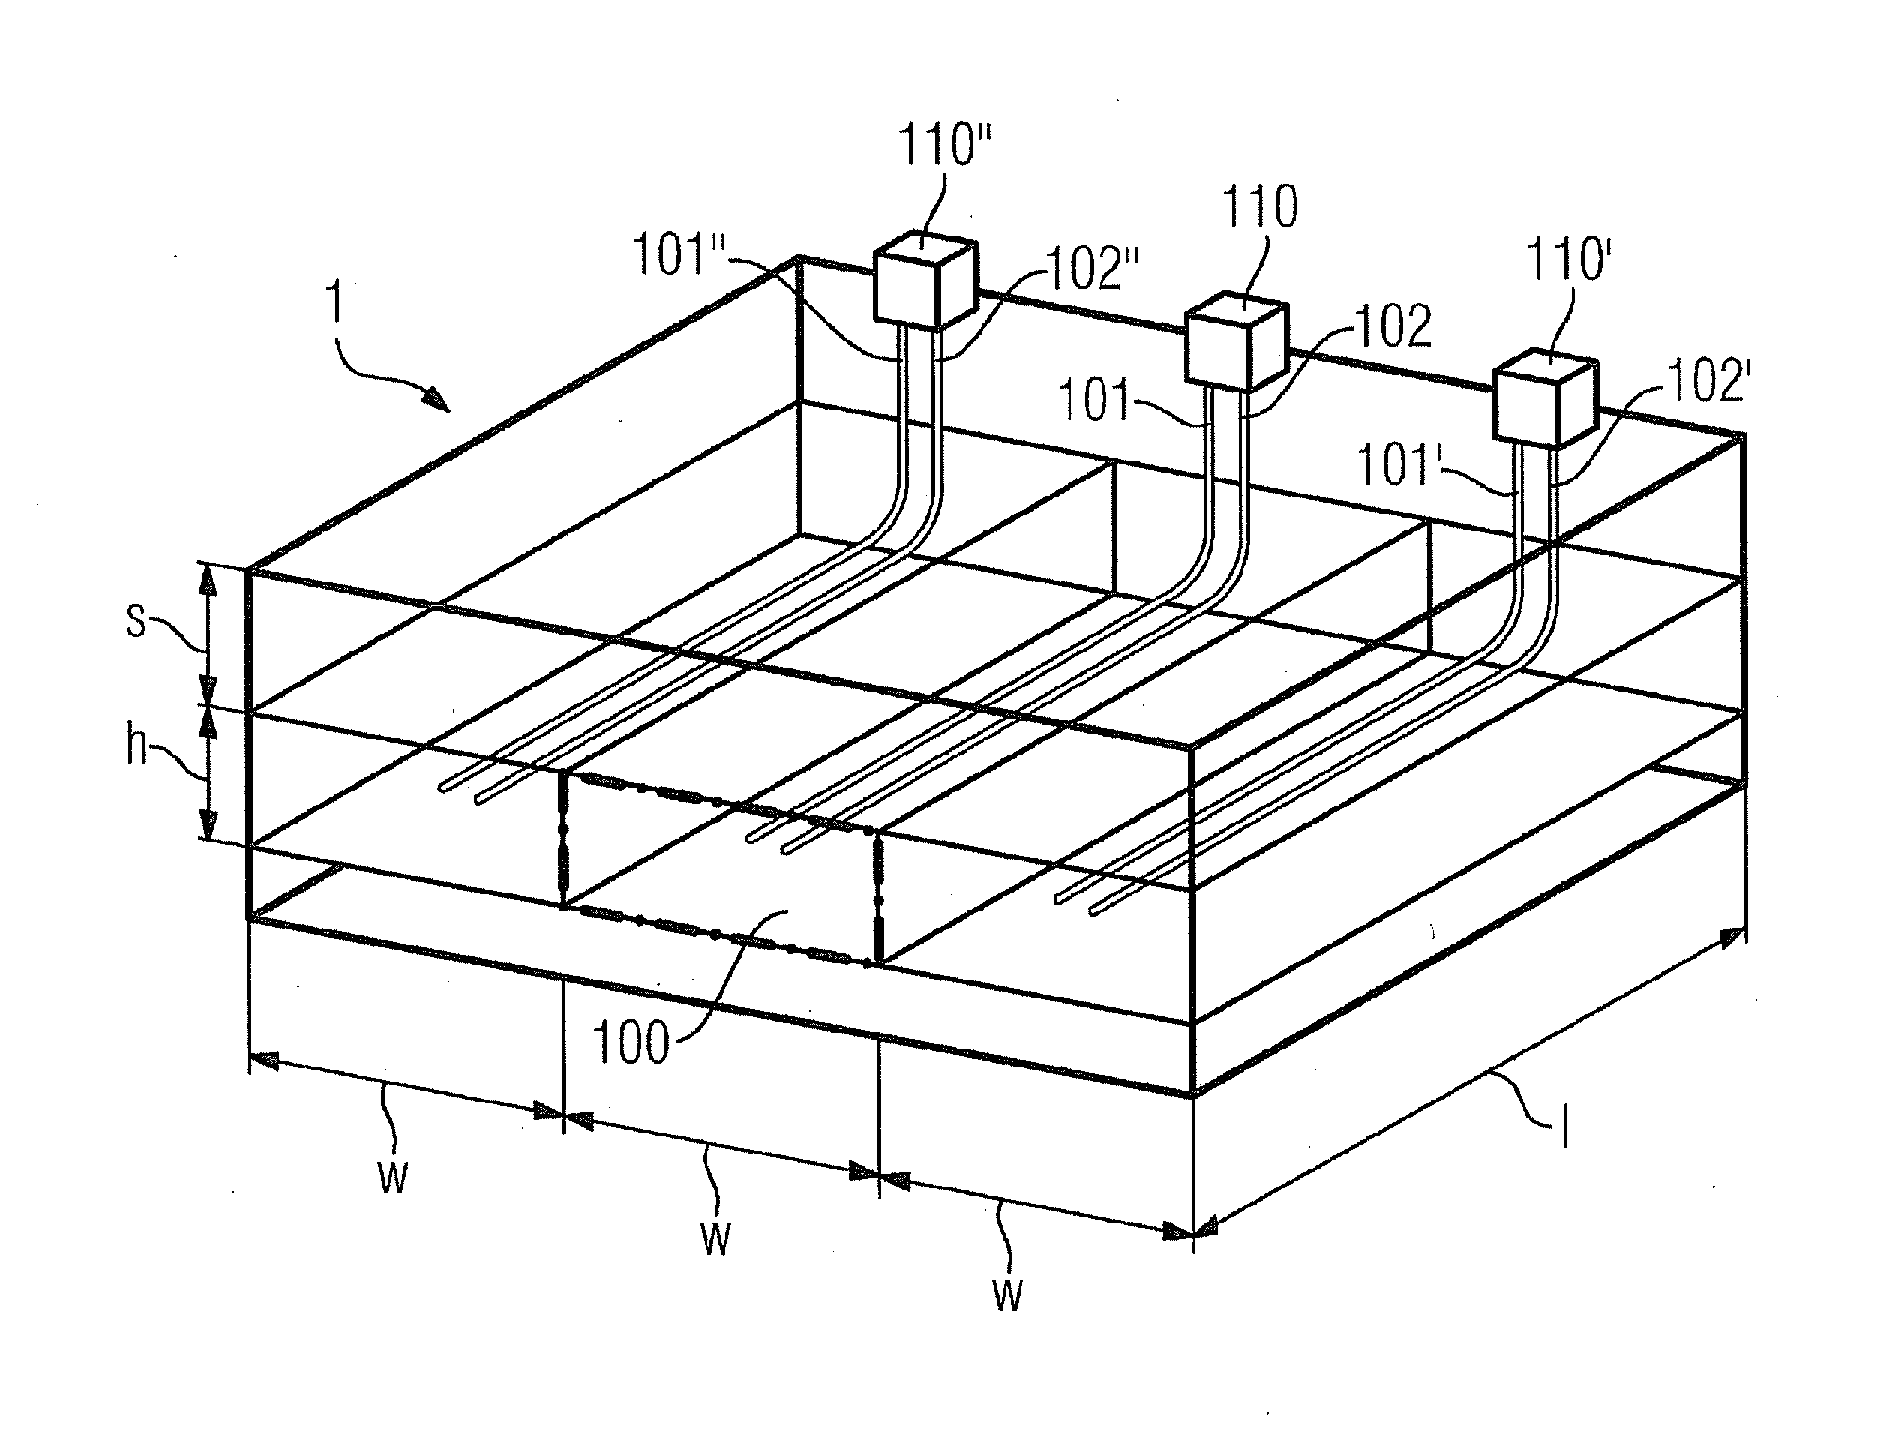 Method and Apparatus for In Situ Extraction of Bitumen or Very Heavy Oil